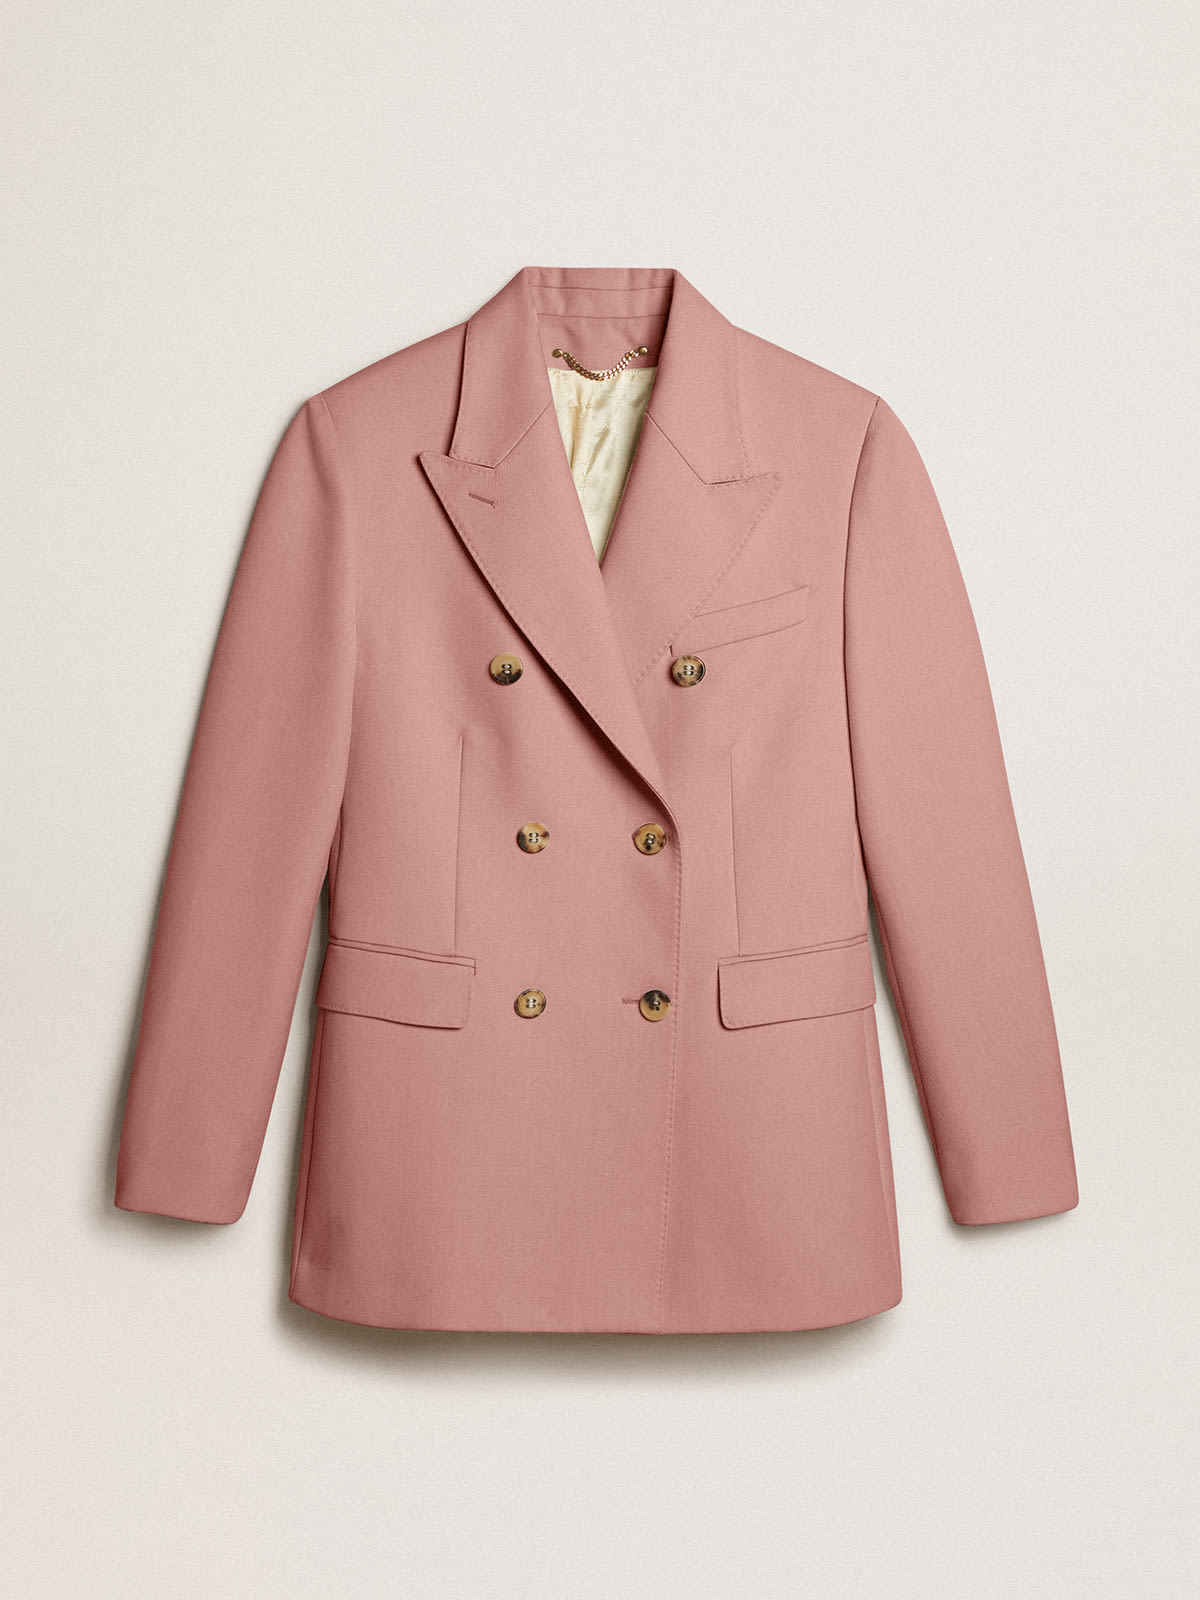 Golden Goose - Double-breasted blazer in pink tailoring fabric in 